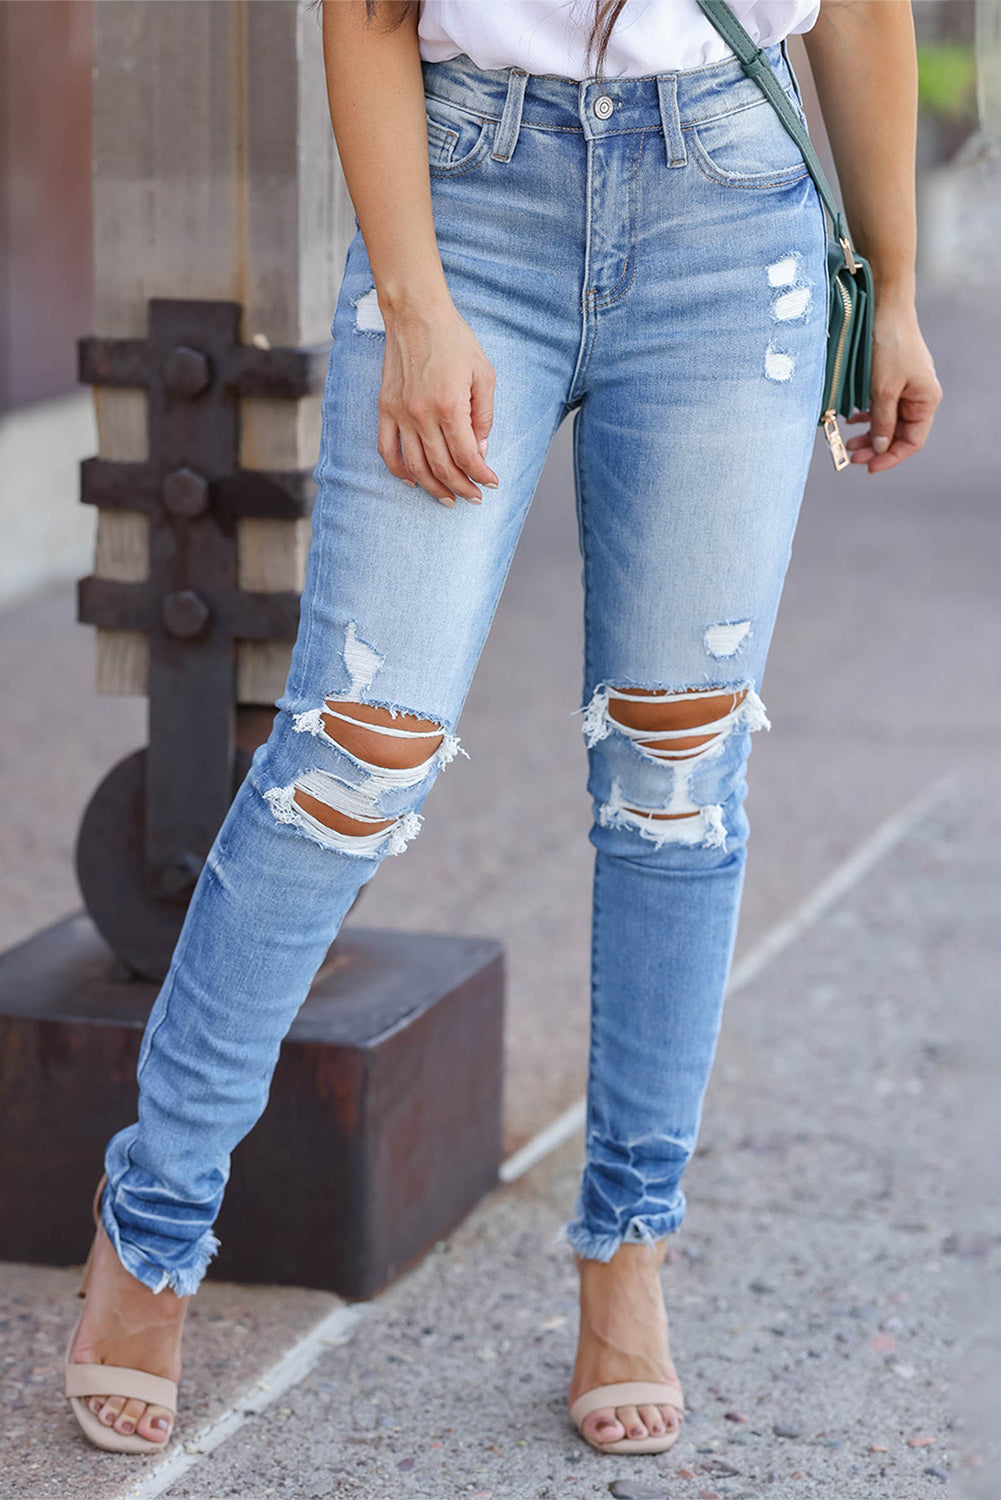 Light Blue 71%Cotton+27.5%Polyester+1.5%Elastane Light Blue Vintage Distressed Ripped Skinny Jeans - women's jeans at TFC&H Co.